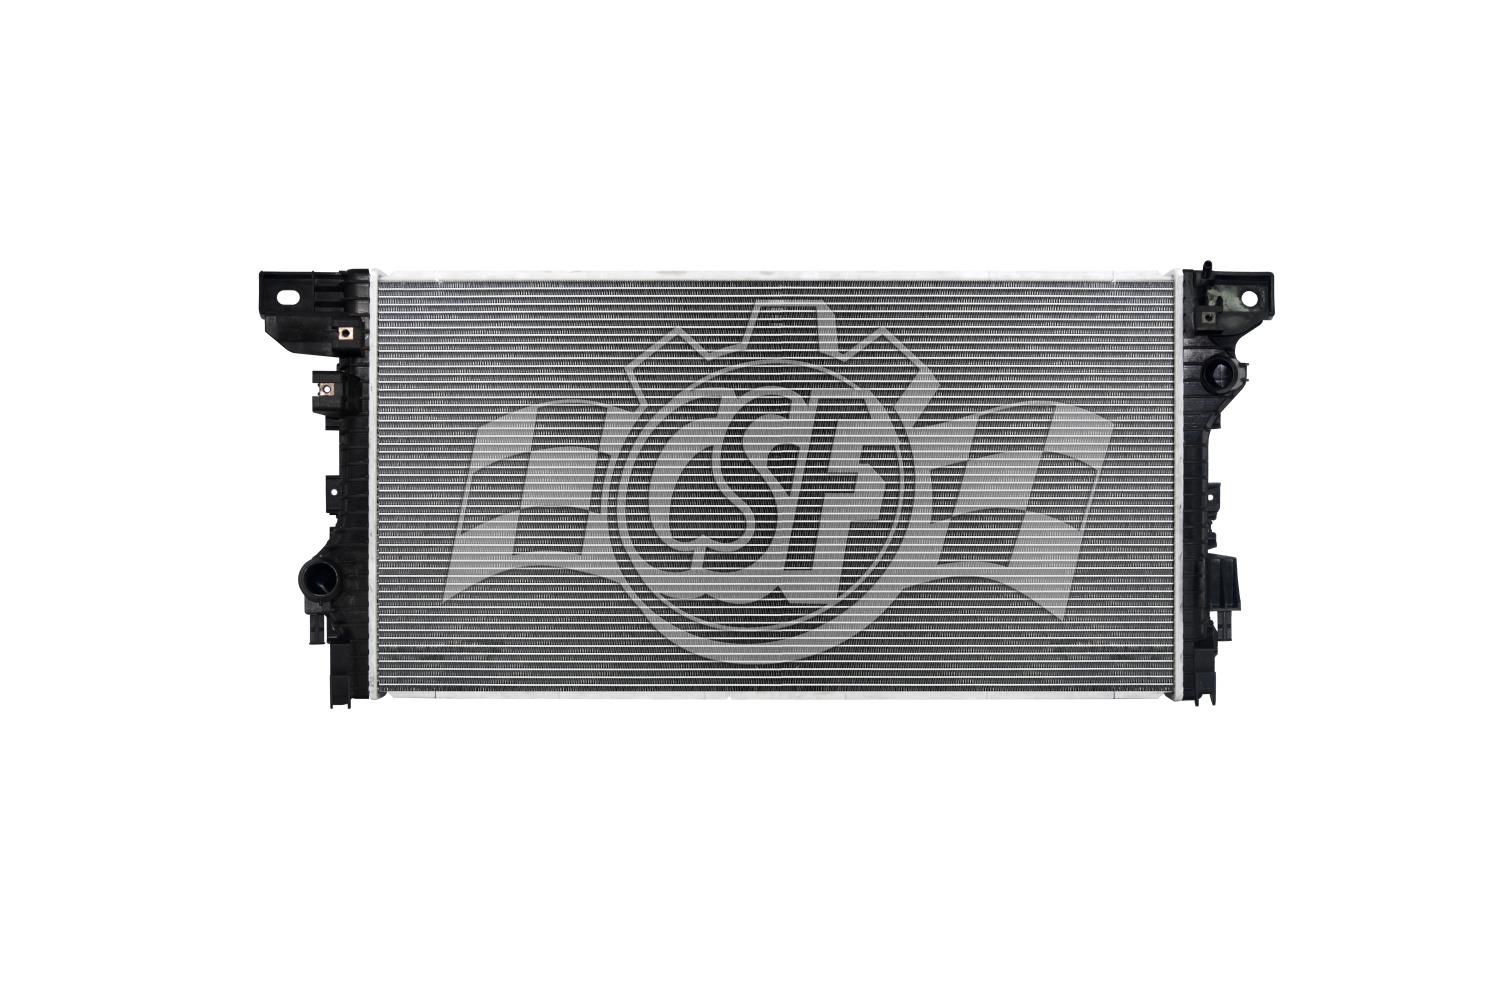 OE-Style 1-Row Radiator, Ford F-150, Ford Expedition, Lincoln Navigator